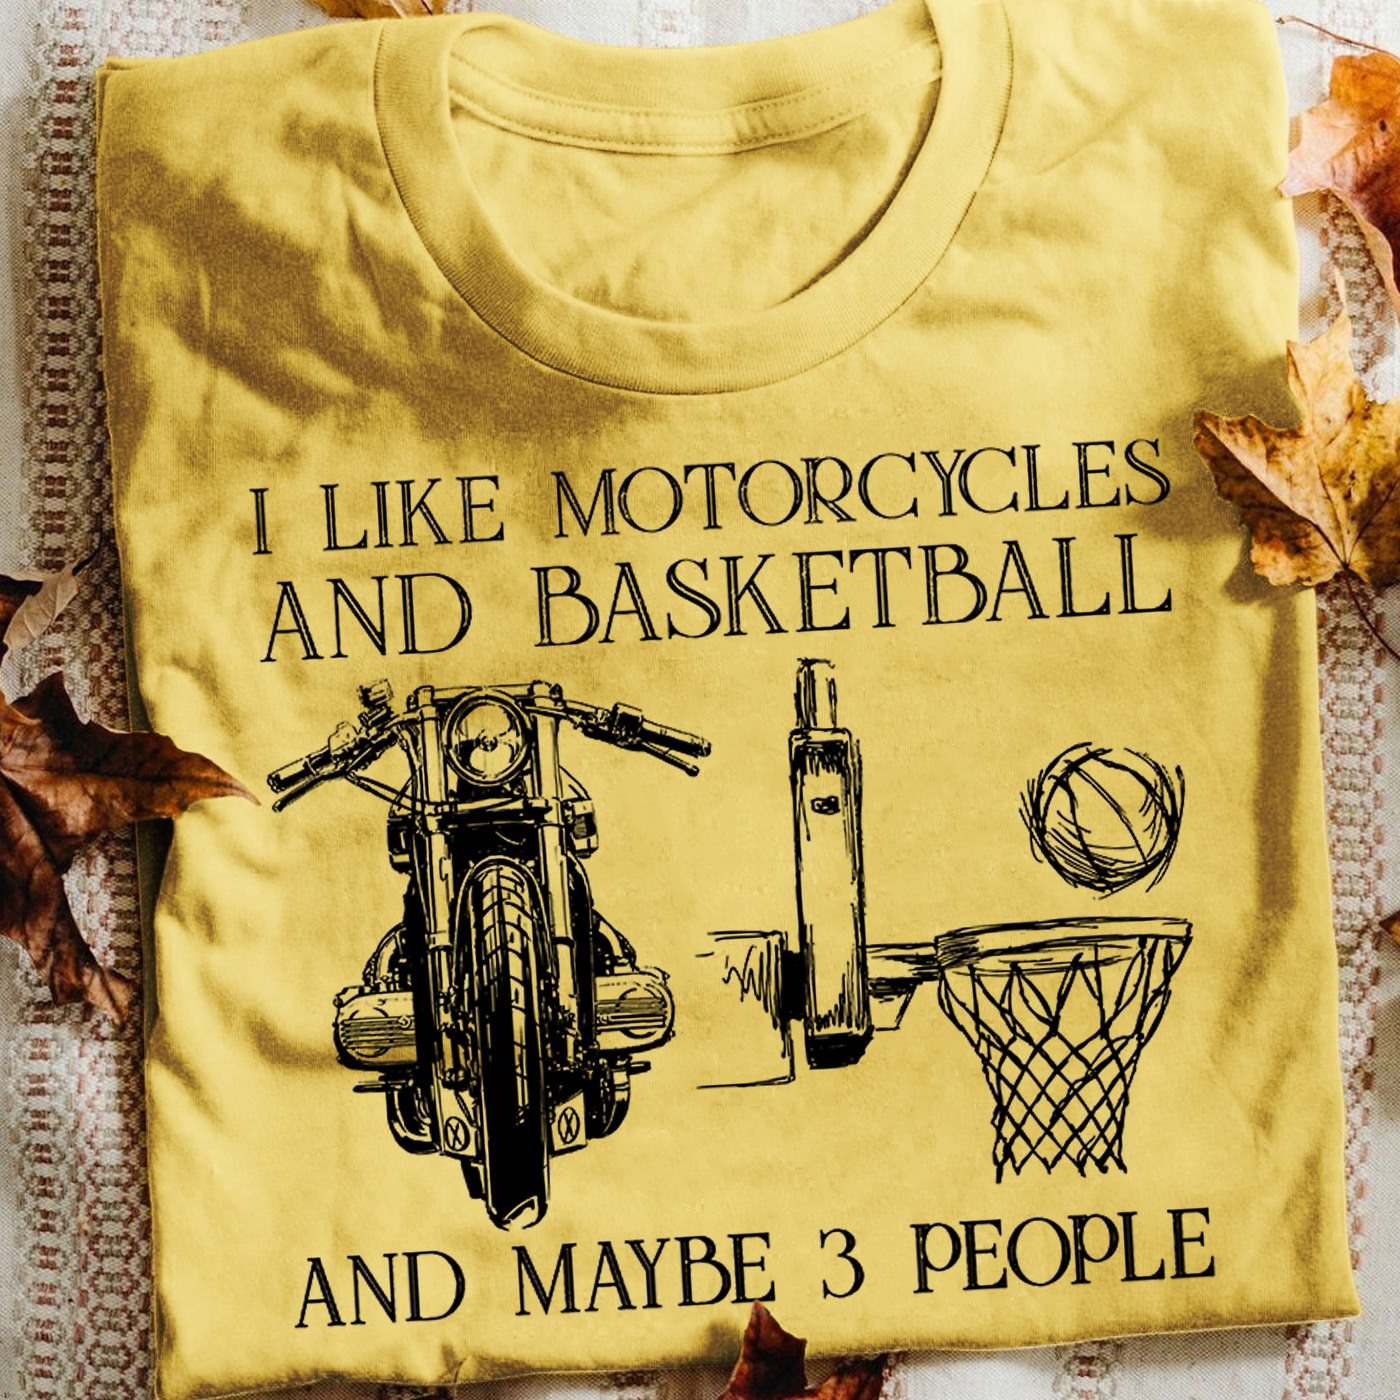 I like motorcycles and basketball and maybe 3 people - Basketball player